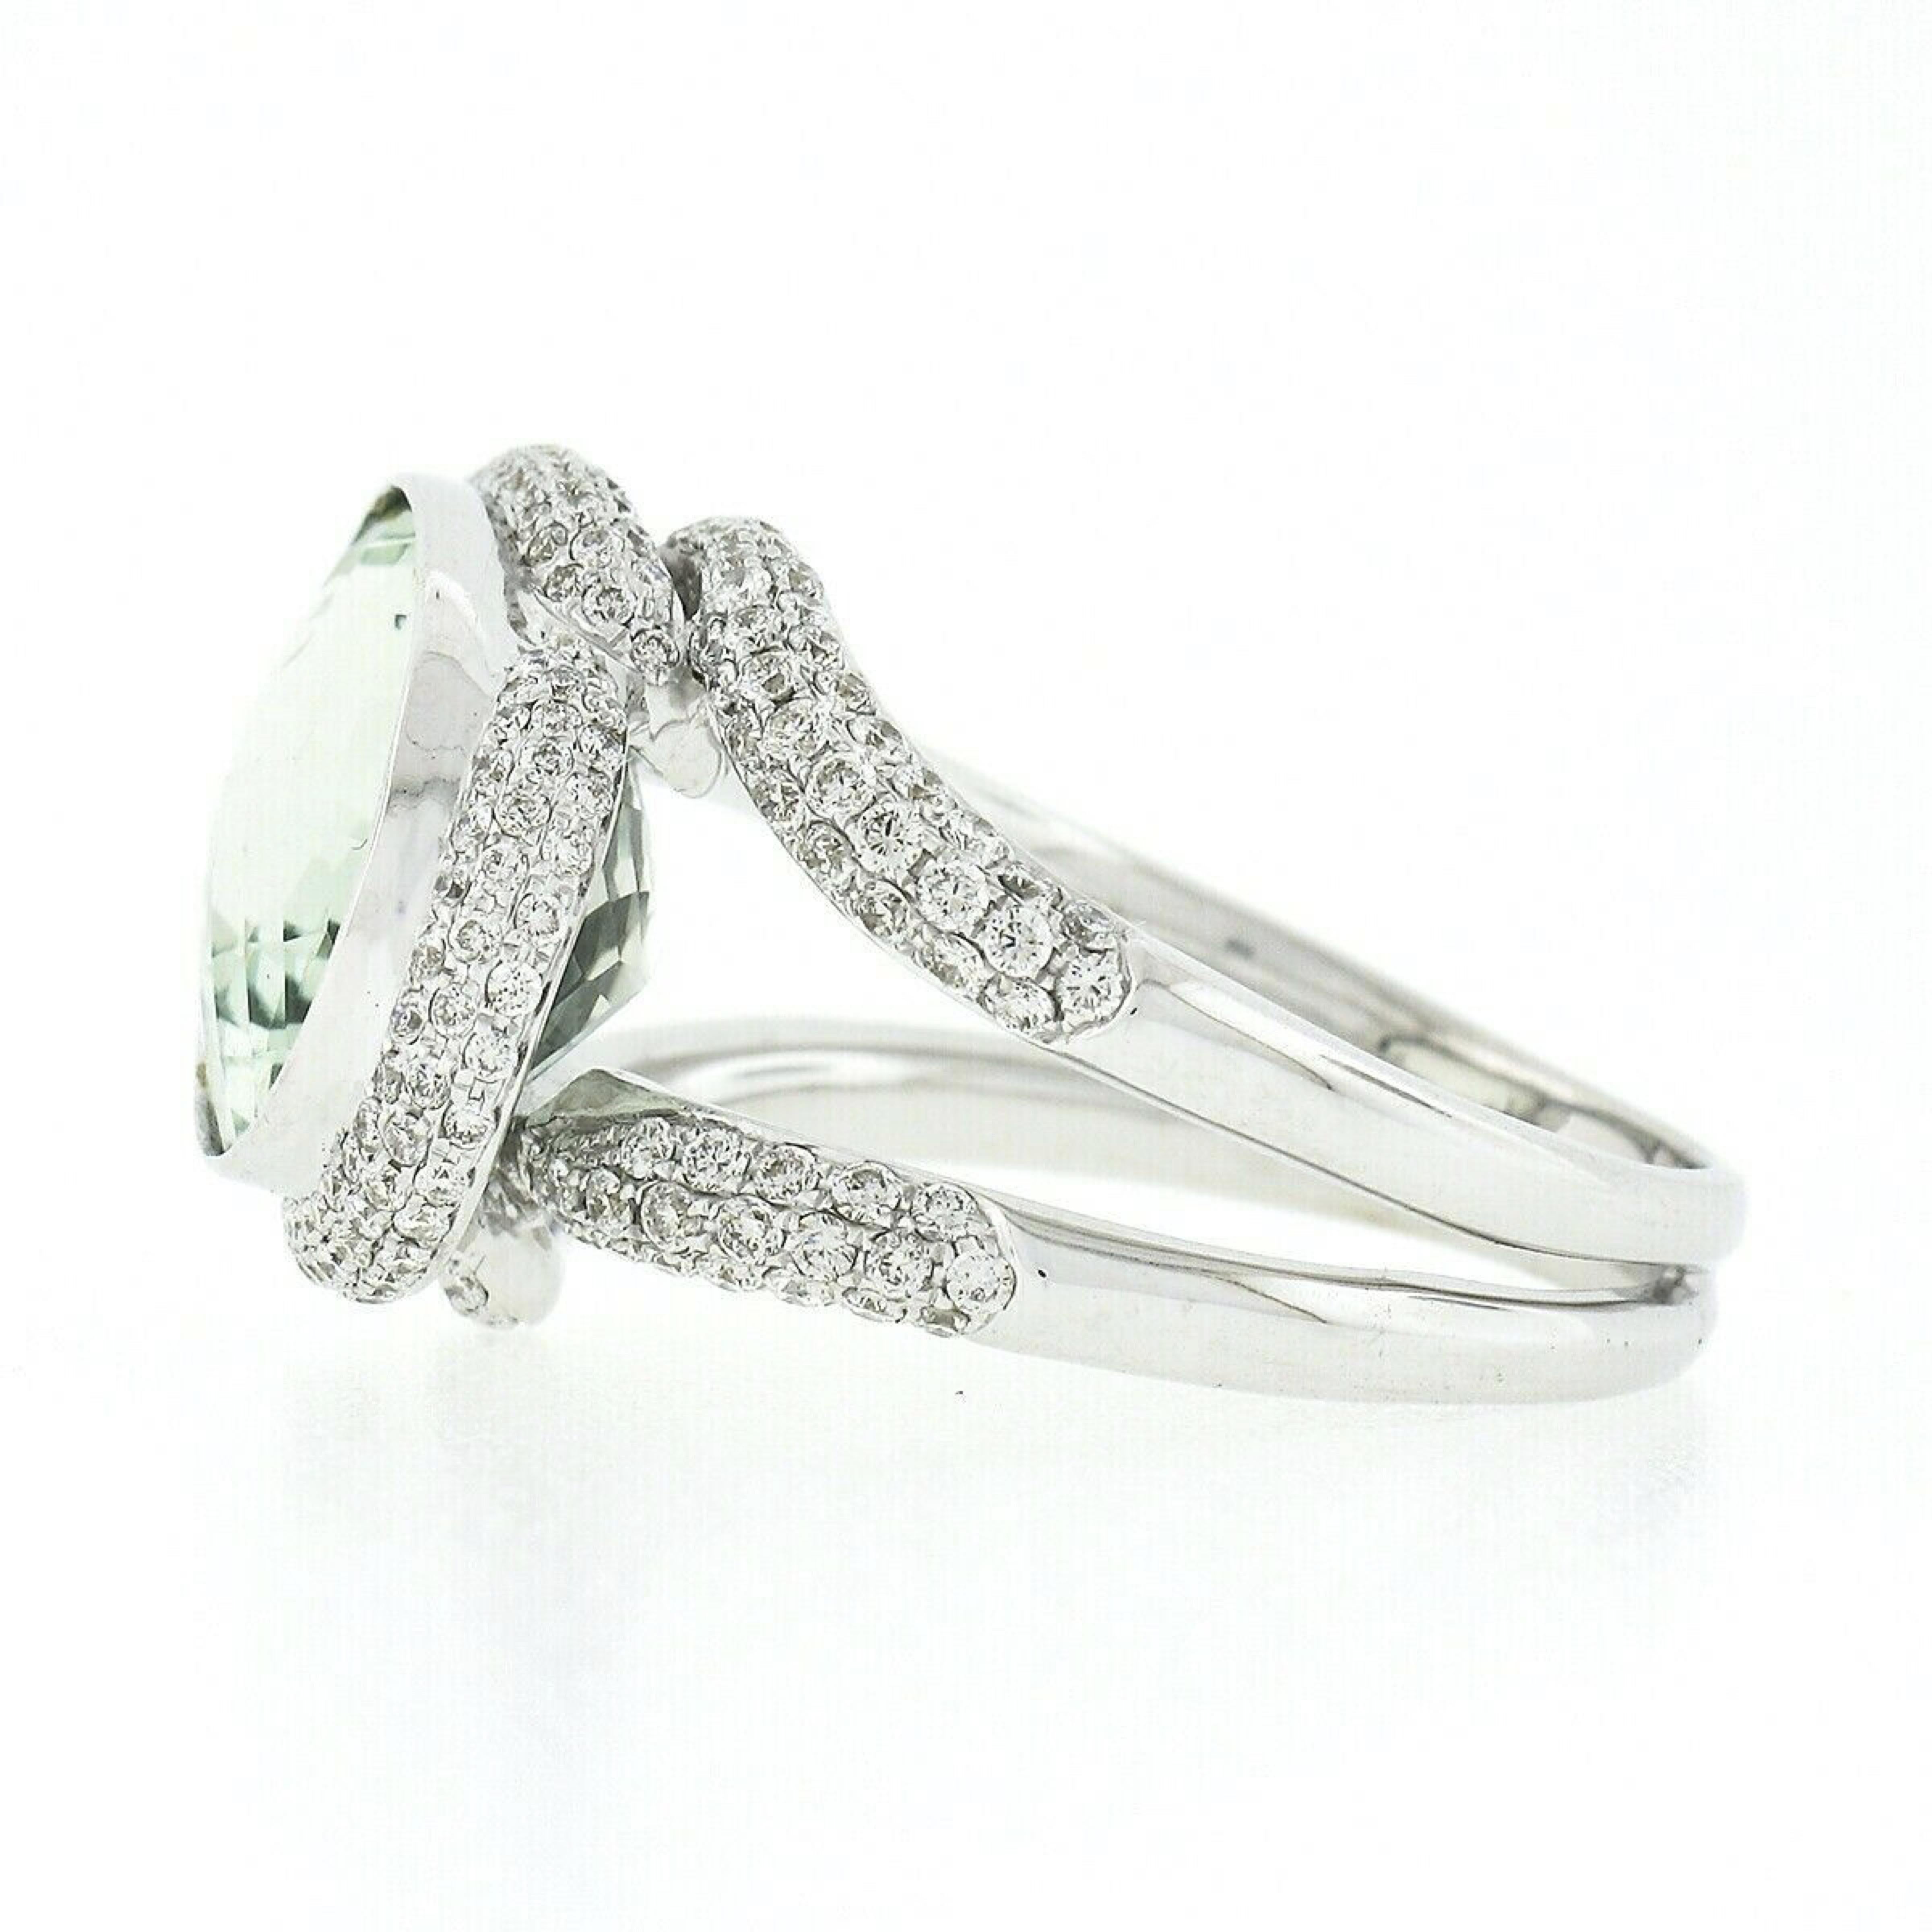 18K White Gold Oval Bezel Prasiolite Quartz & Pave Diamond Twisted Cocktail Ring In Excellent Condition For Sale In Montclair, NJ